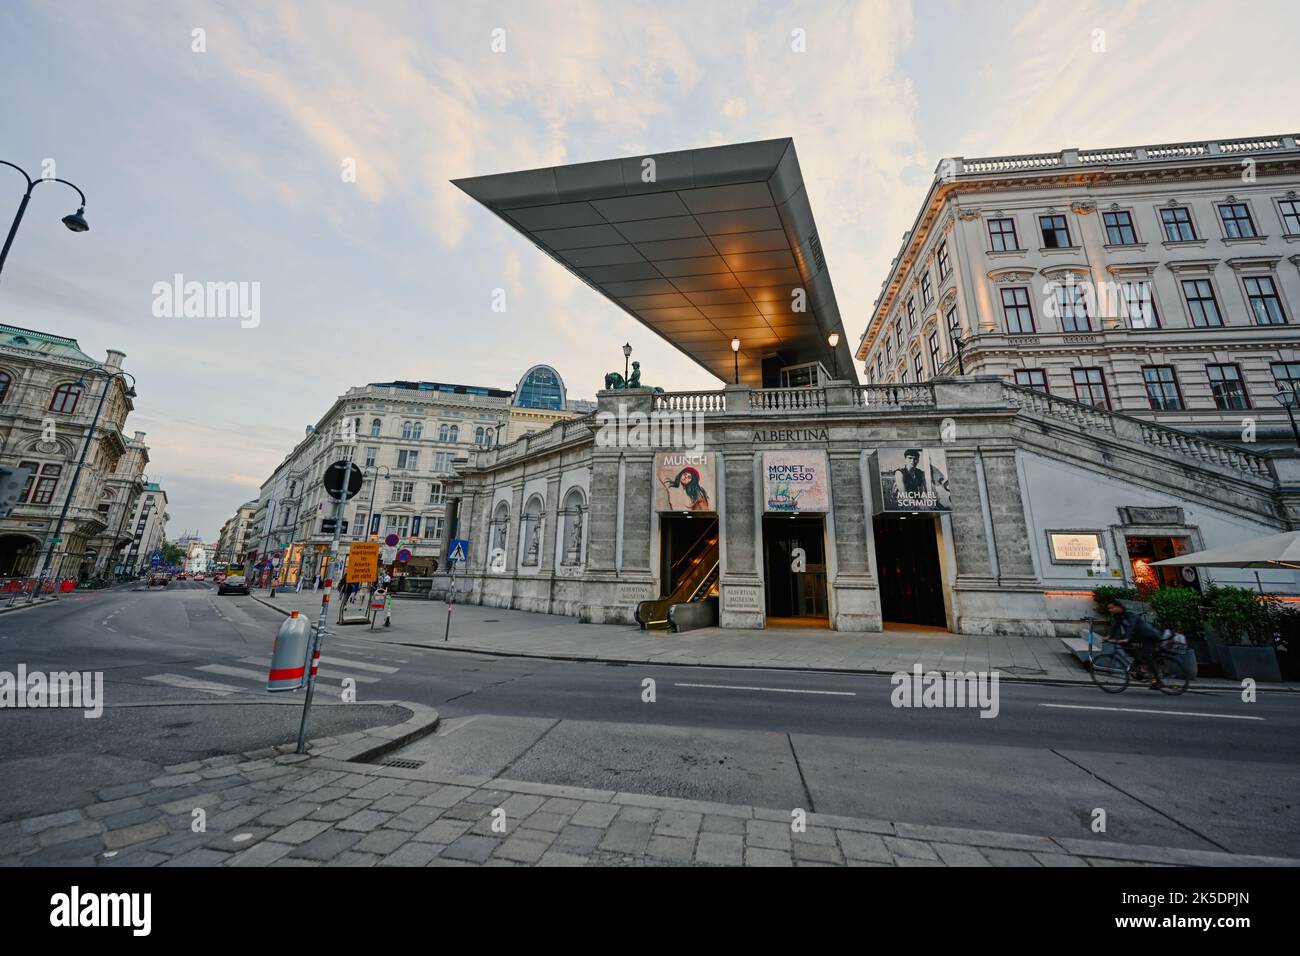 Vienna, Austria - May 17, 2022: The Albertina is a museum in the Innere Stadt of Vienna, Austria. Stock Photo